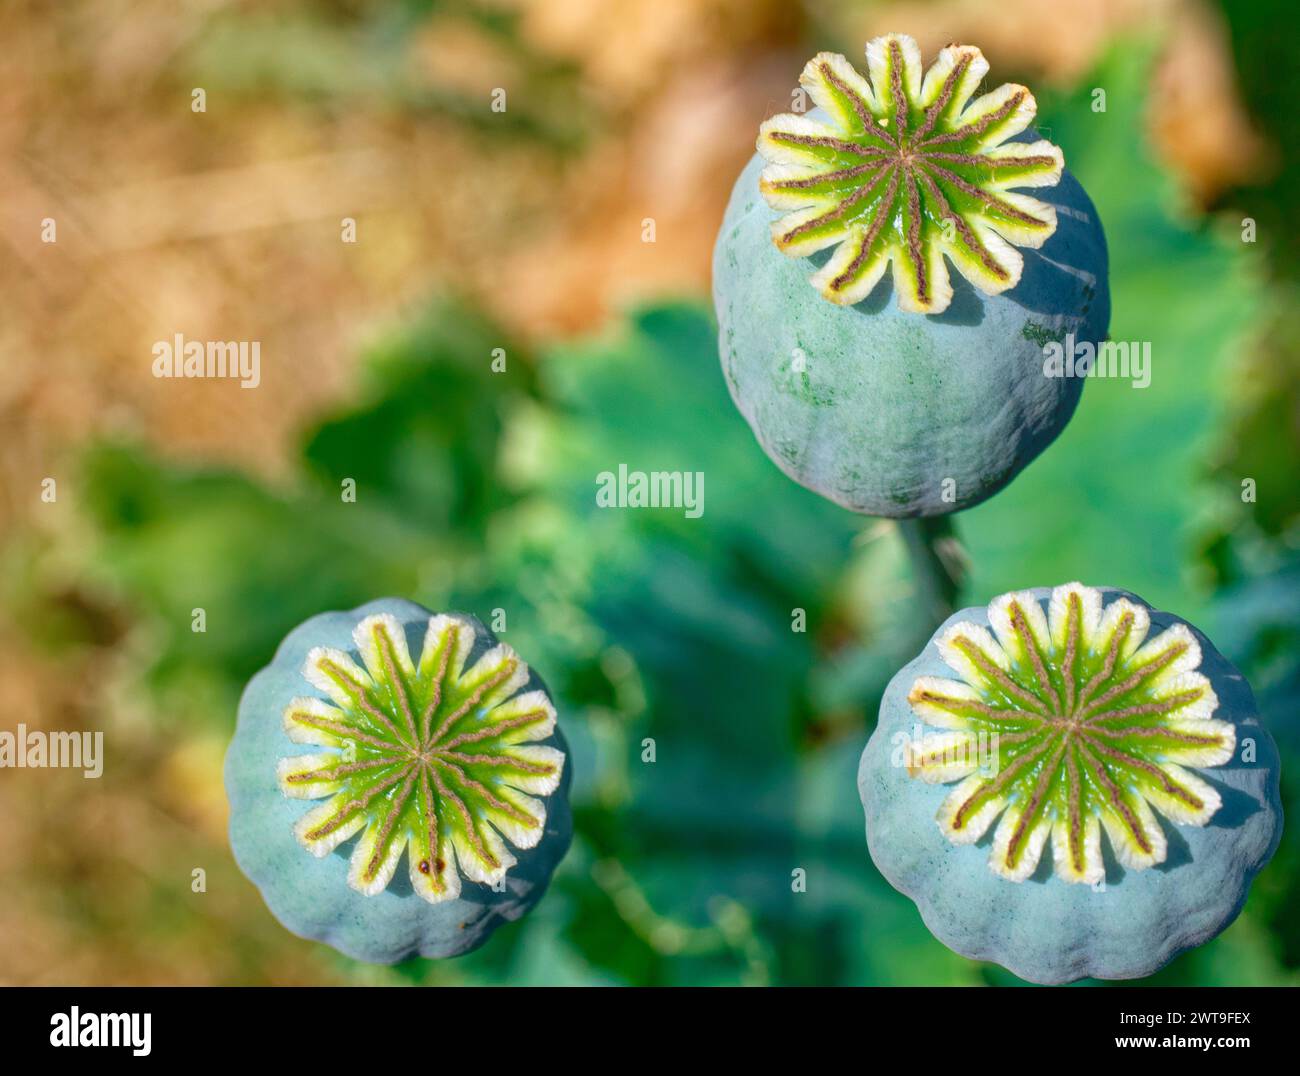 Three green poppy seed pods stand against a blurred background, their tops open revealing the seeds inside. Stock Photo